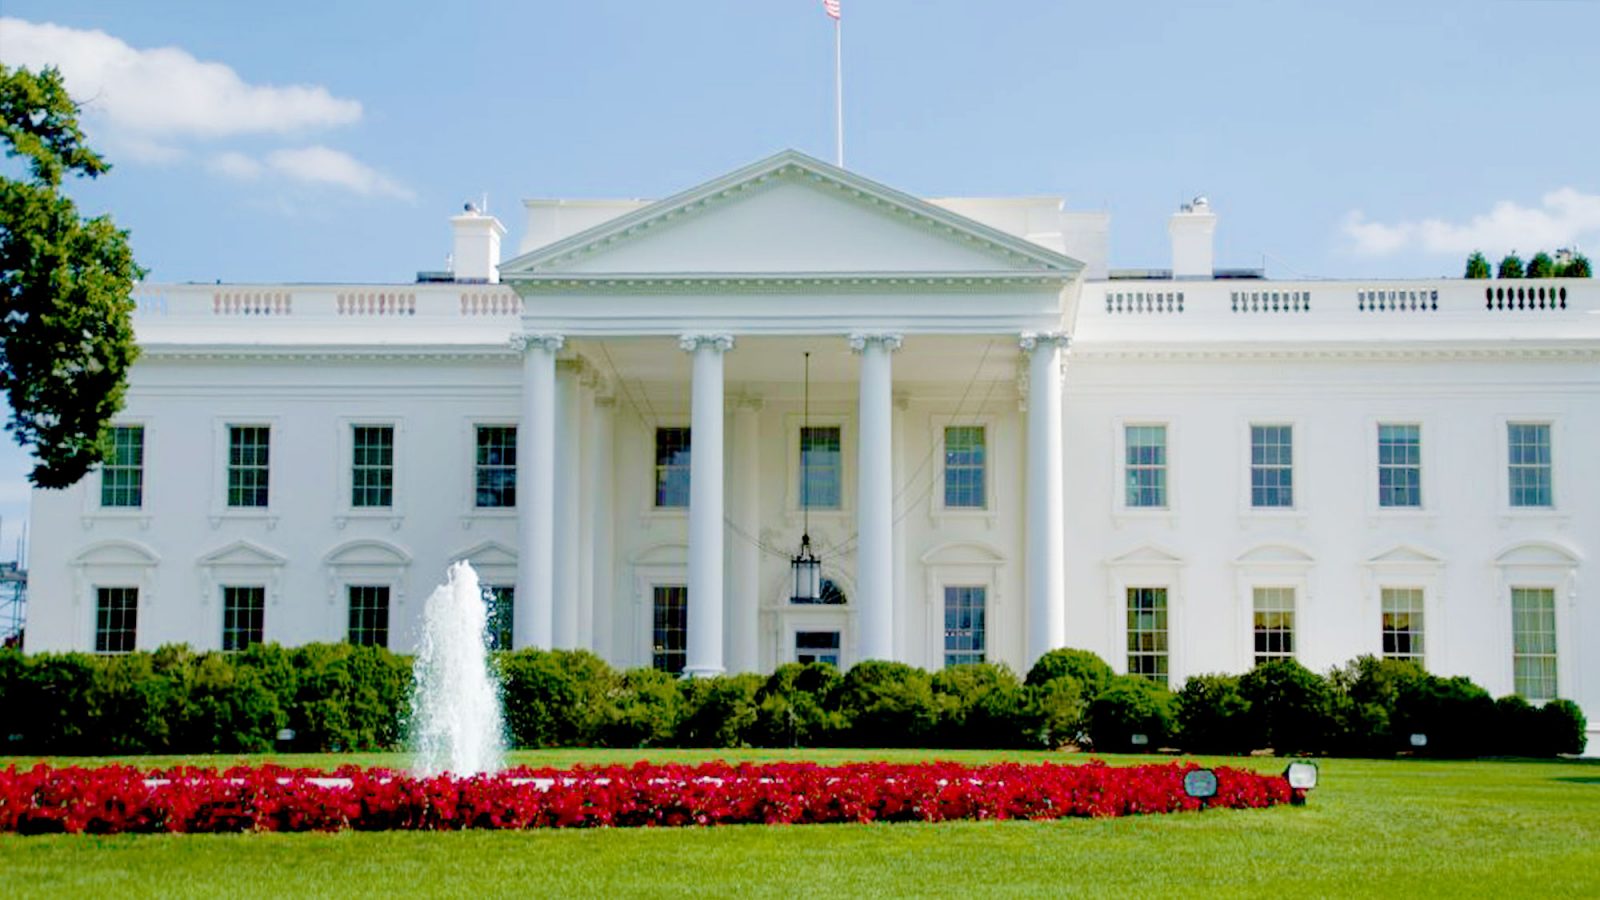 The White House stands with a ring of red flowers surrounding a fountain in front.